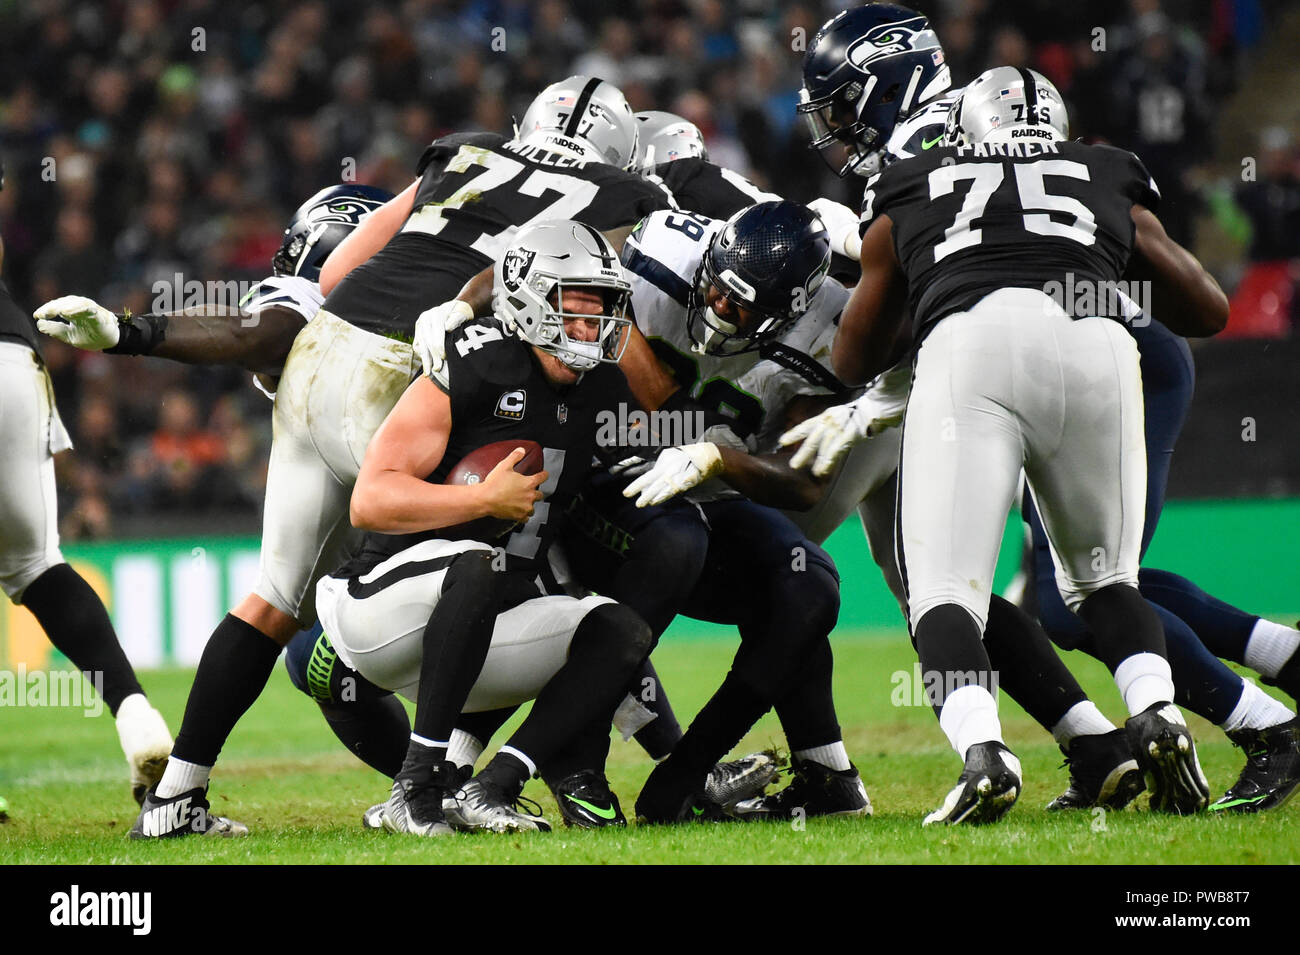 London, UK.  14 October 2018. Quarterback Derek Carr (4) of Oakland gets sacked. Seattle Seahawks at Oakland Raiders NFL game at Wembley Stadium, the first of the NFL London 2018 games. Final score Seahawks 27 Raiders 3.  Credit: Stephen Chung / Alamy Live News Stock Photo